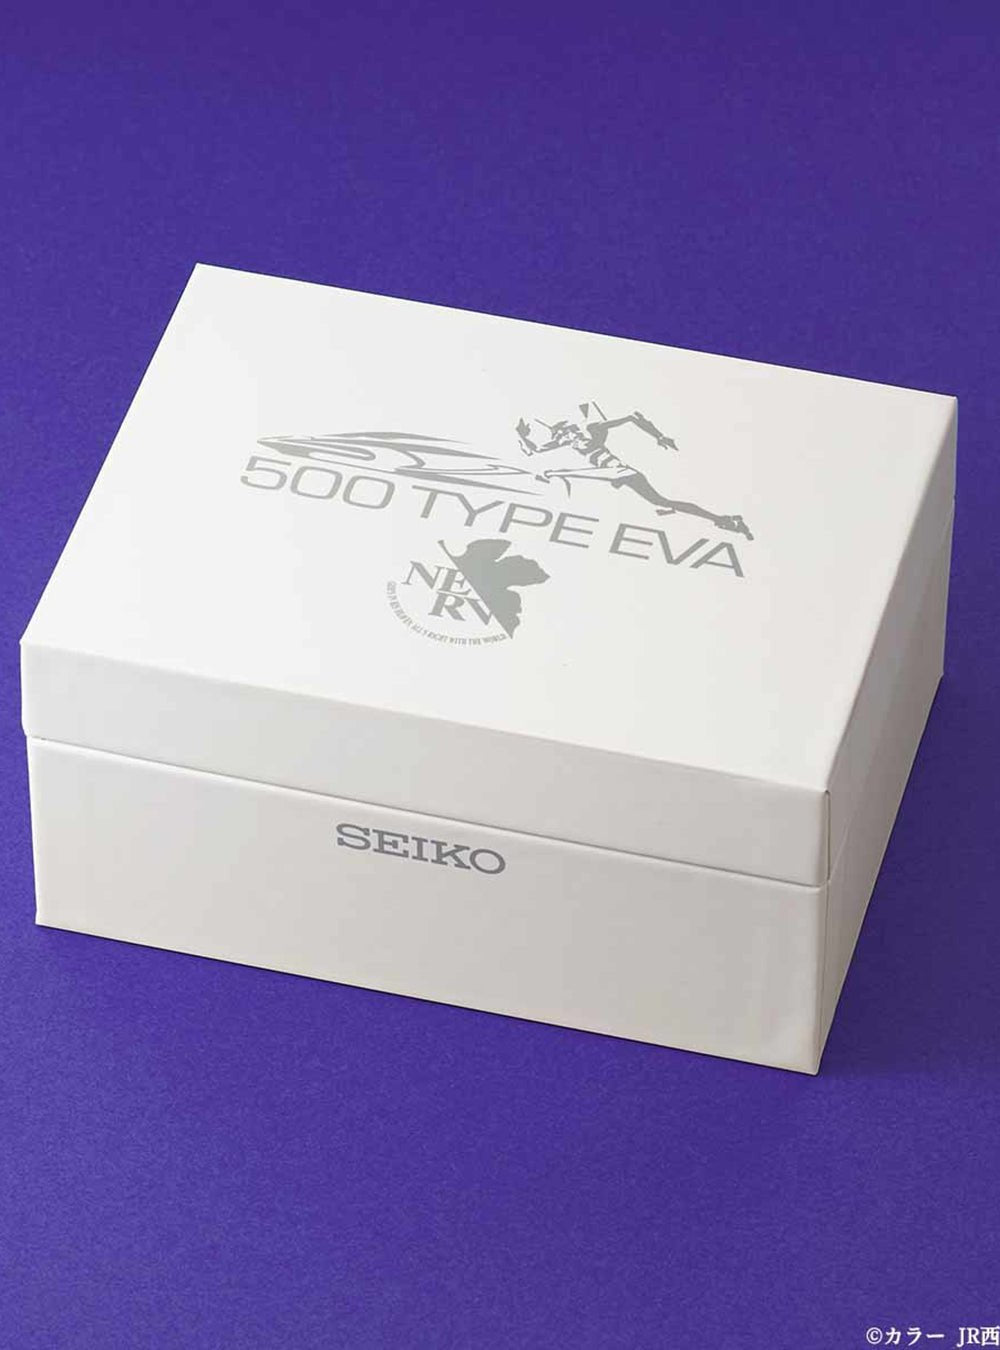 SEIKO EVANGELION 500 TYPE EVA MADE IN JAPAN LIMITED EDITION